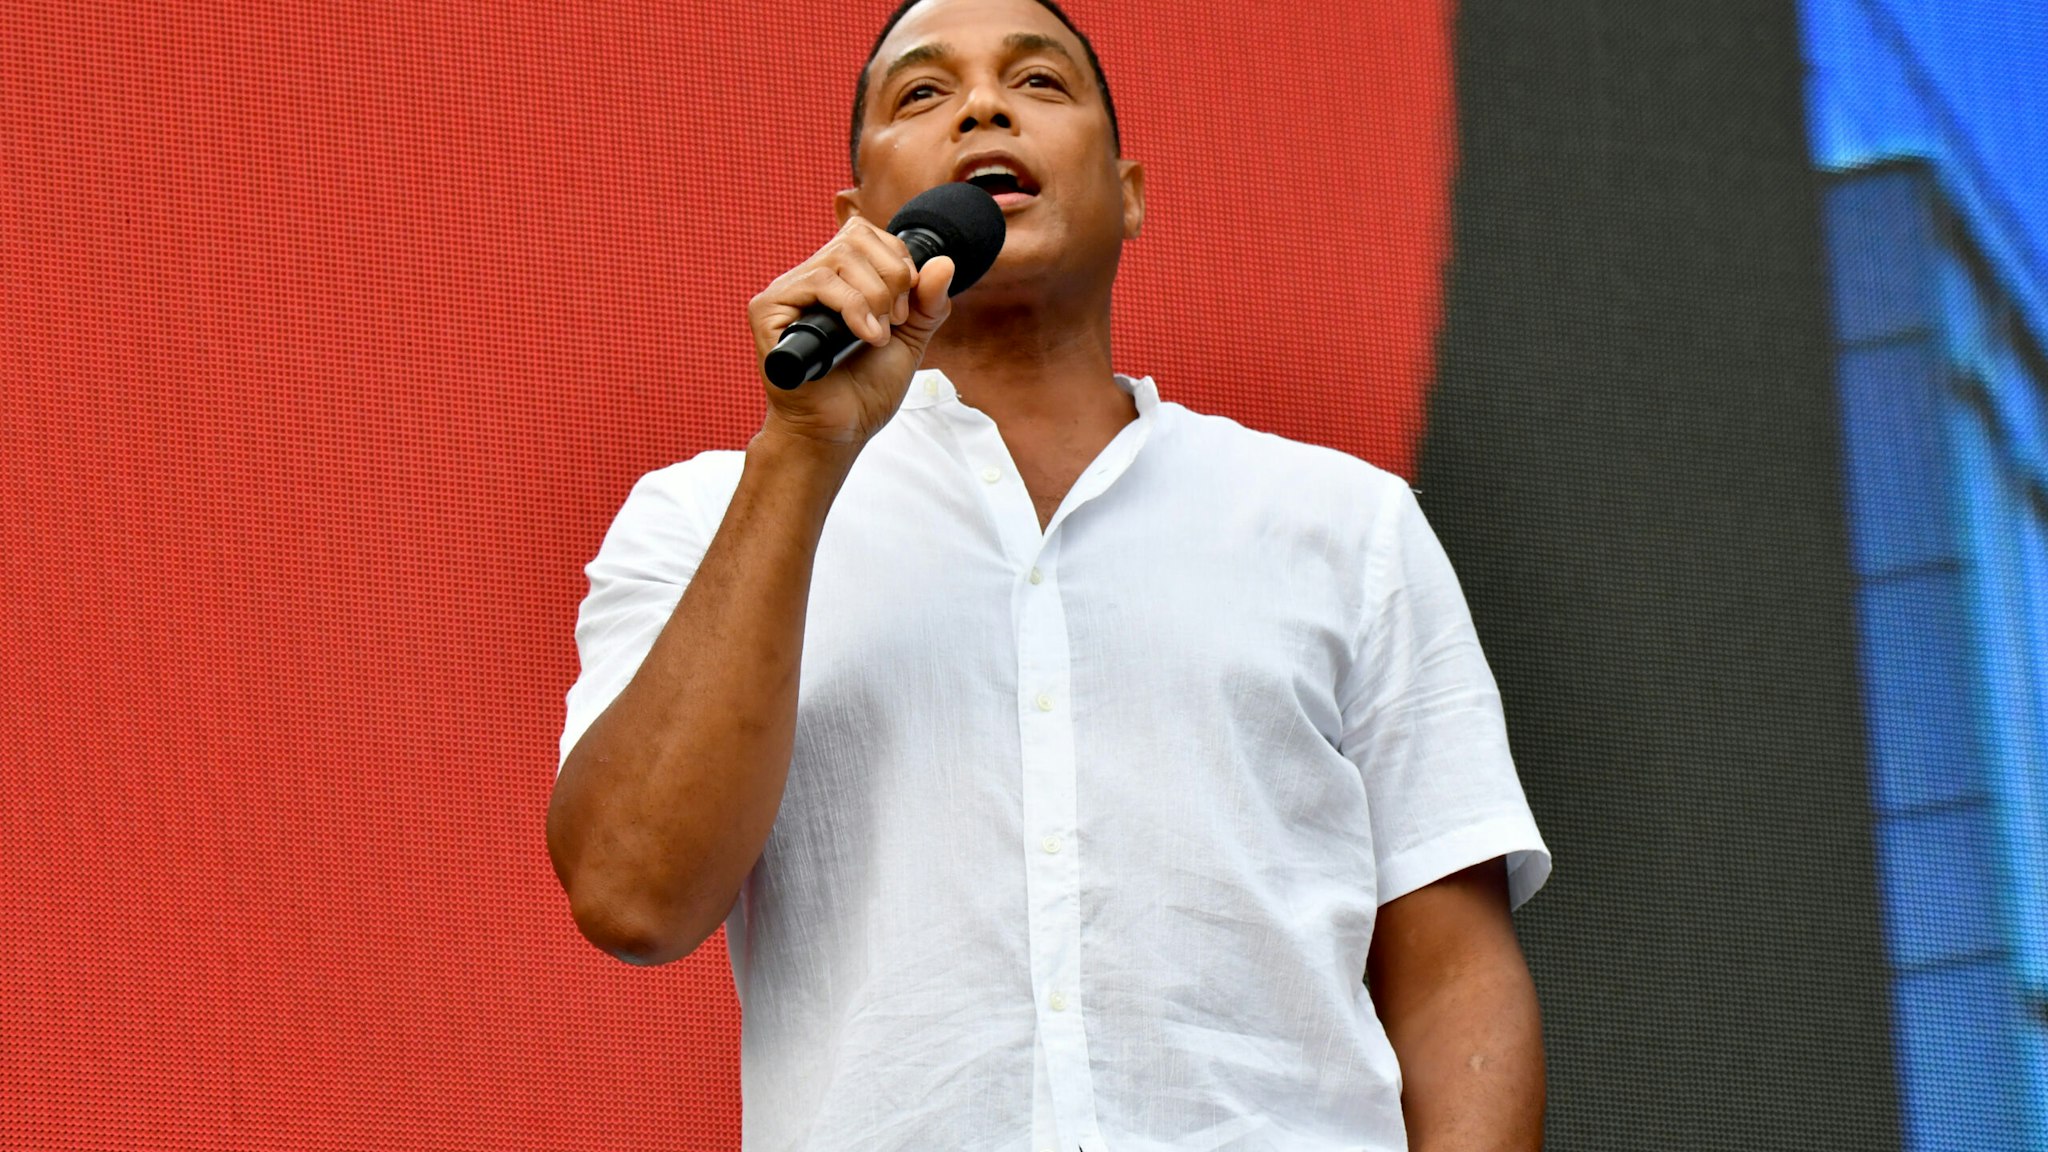 NEW YORK, NEW YORK - AUGUST 21: Don Lemon speaks onstage during We Love NYC: The Homecoming Concert Produced by NYC, Clive Davis, and Live Nation on August 21, 2021 in New York City. (Photo by Jeff Kravitz/Getty Images for Live Nation)